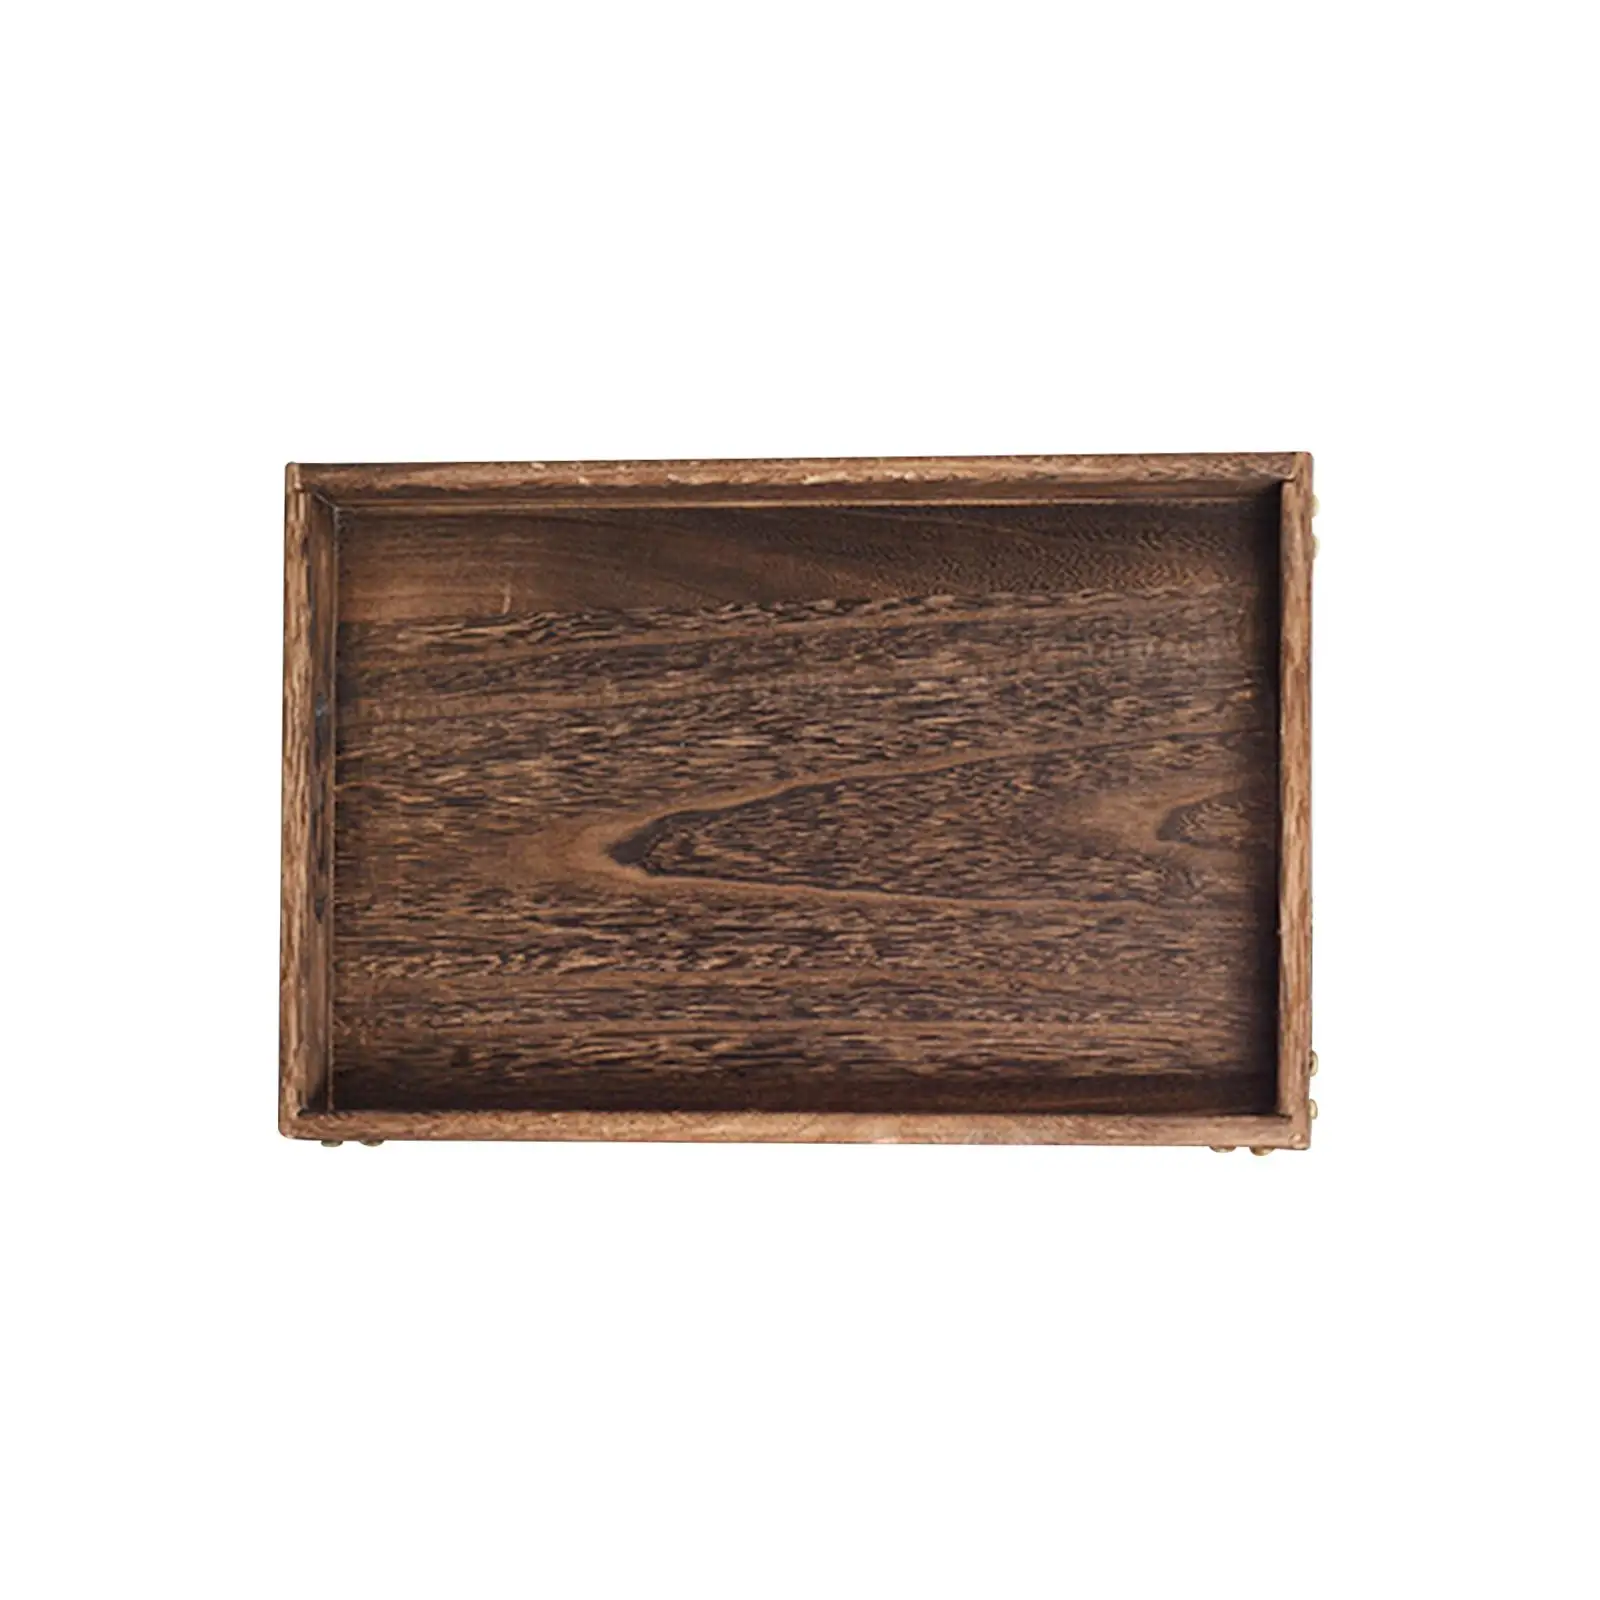 Rustic Wood Serving Tray Platter Rectangular Eating Tray for Appetizers Snacks Convenient Multifunctional Coffee